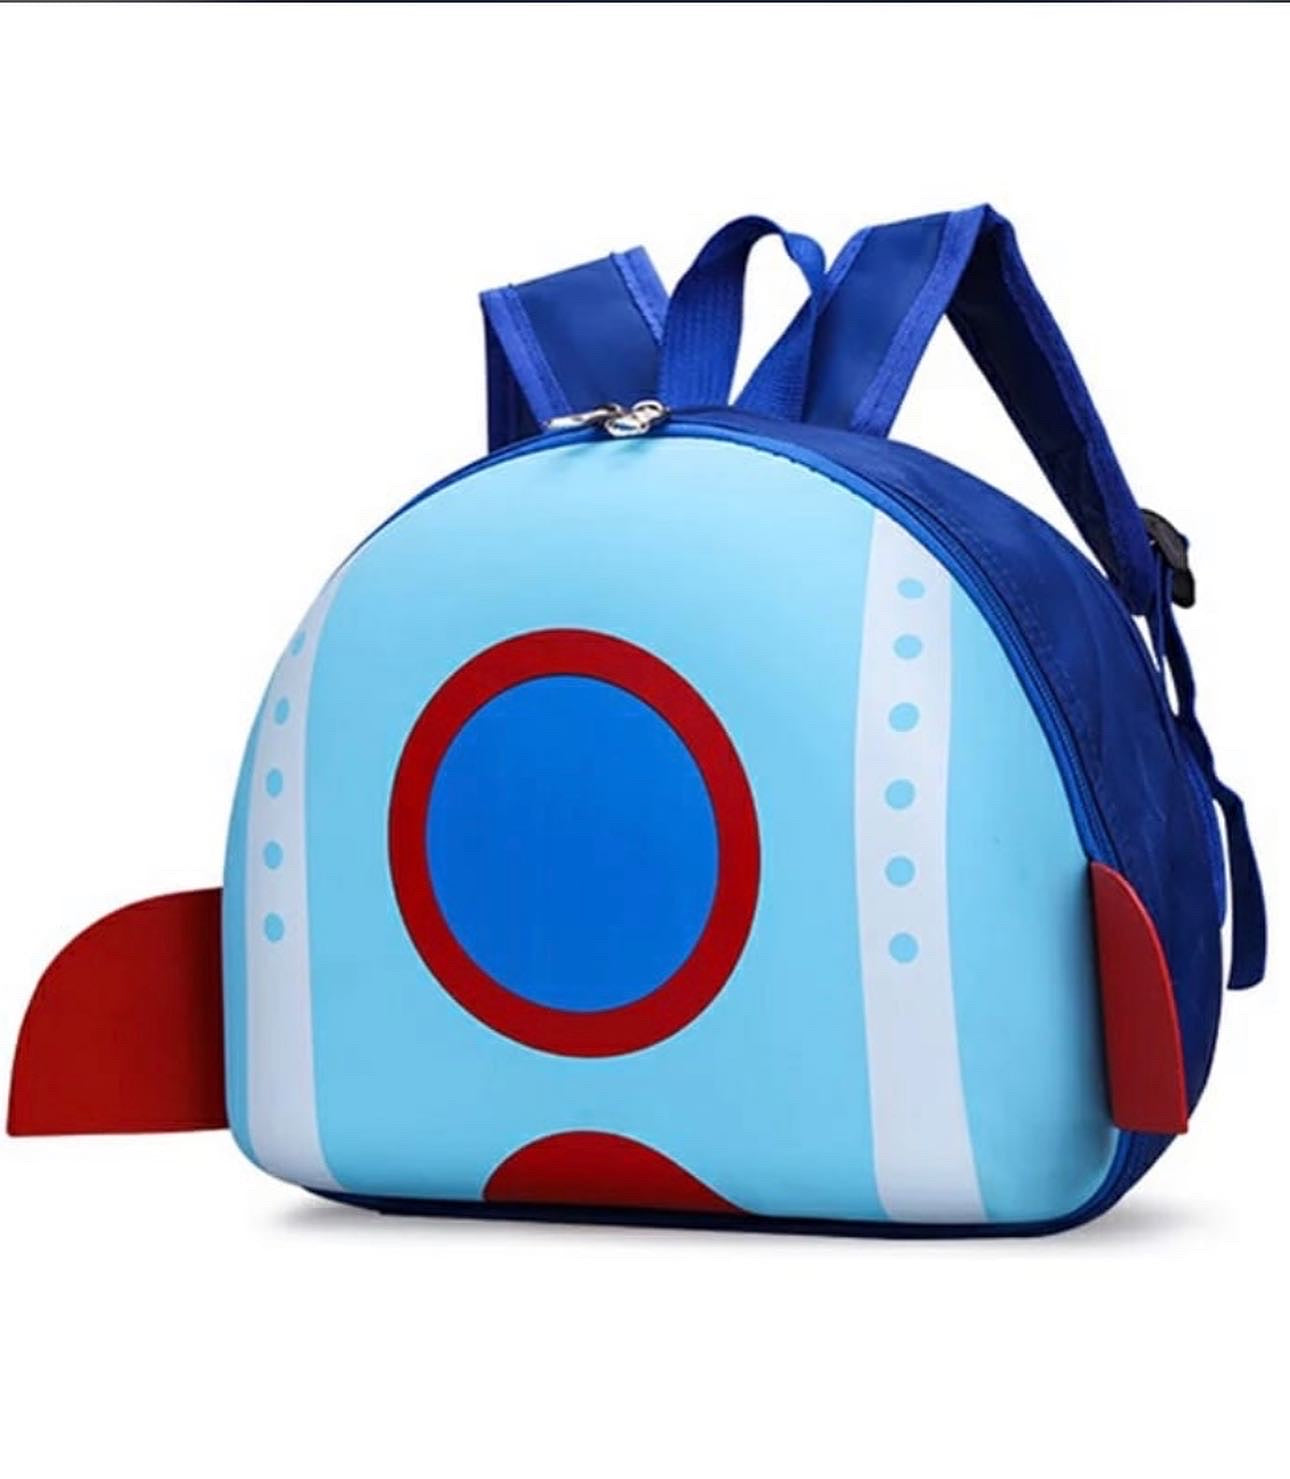 Cute Backpack for Toddlers, Ideal for Day care, Preschool/Nursery